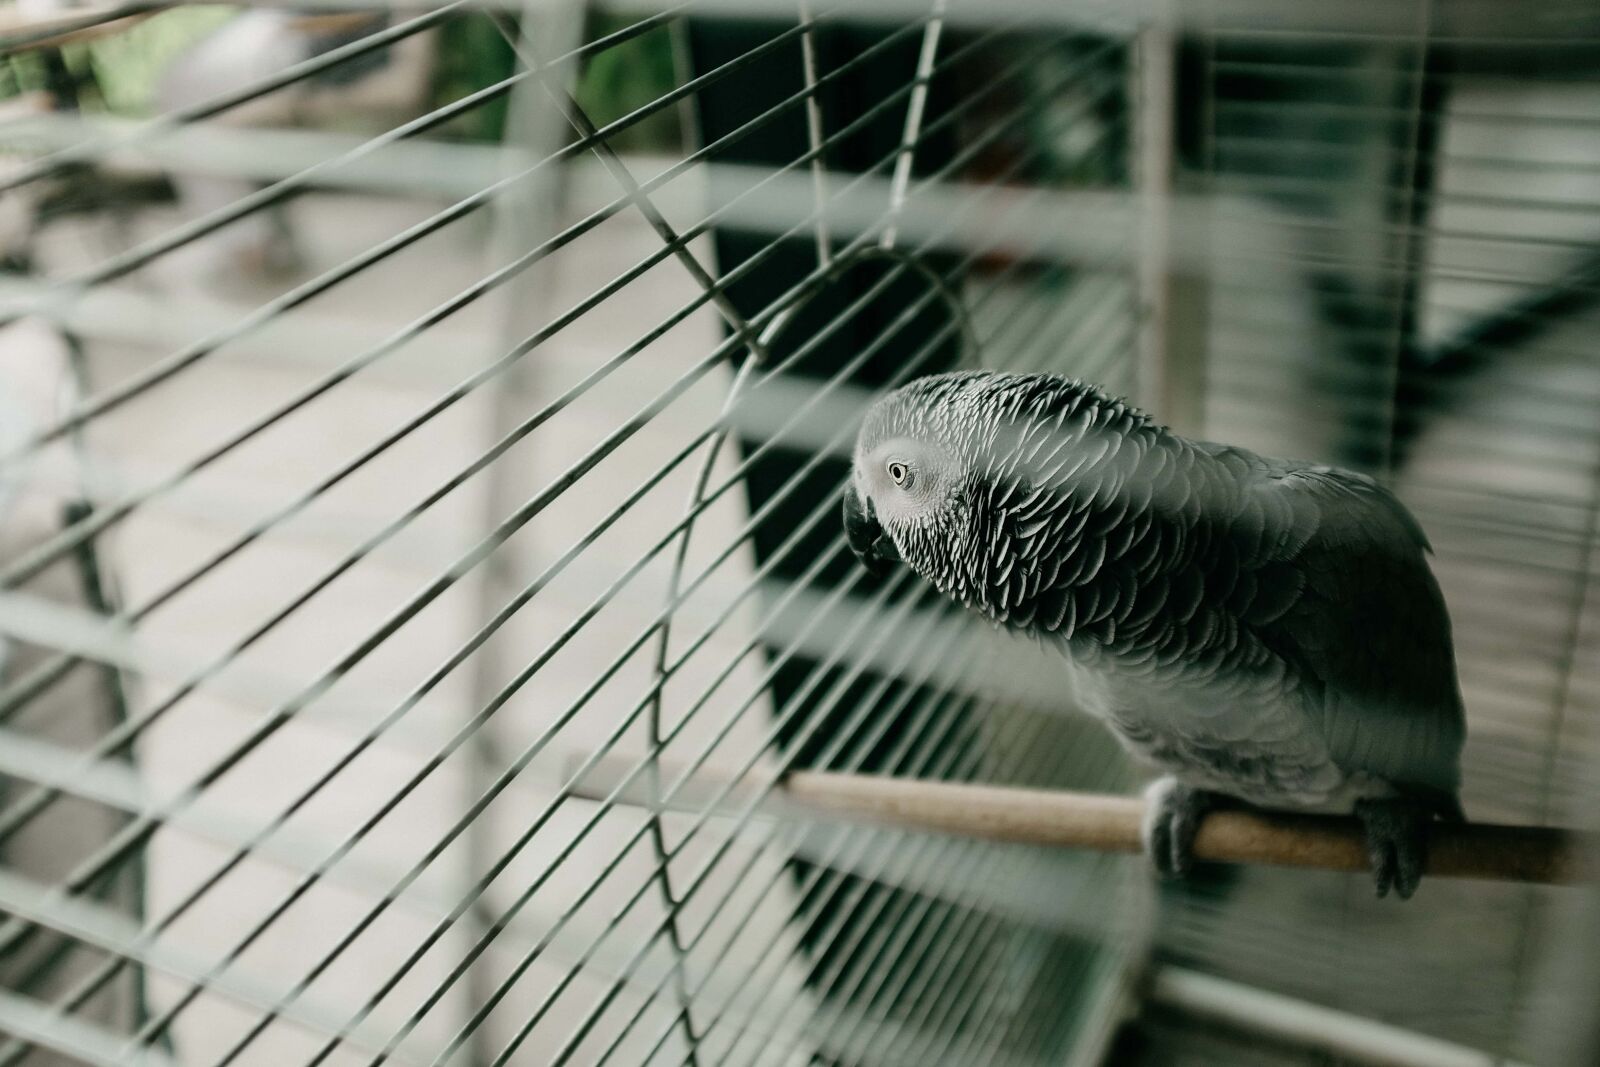 Fujifilm X100T sample photo. Parrot, bird, cage, fence photography